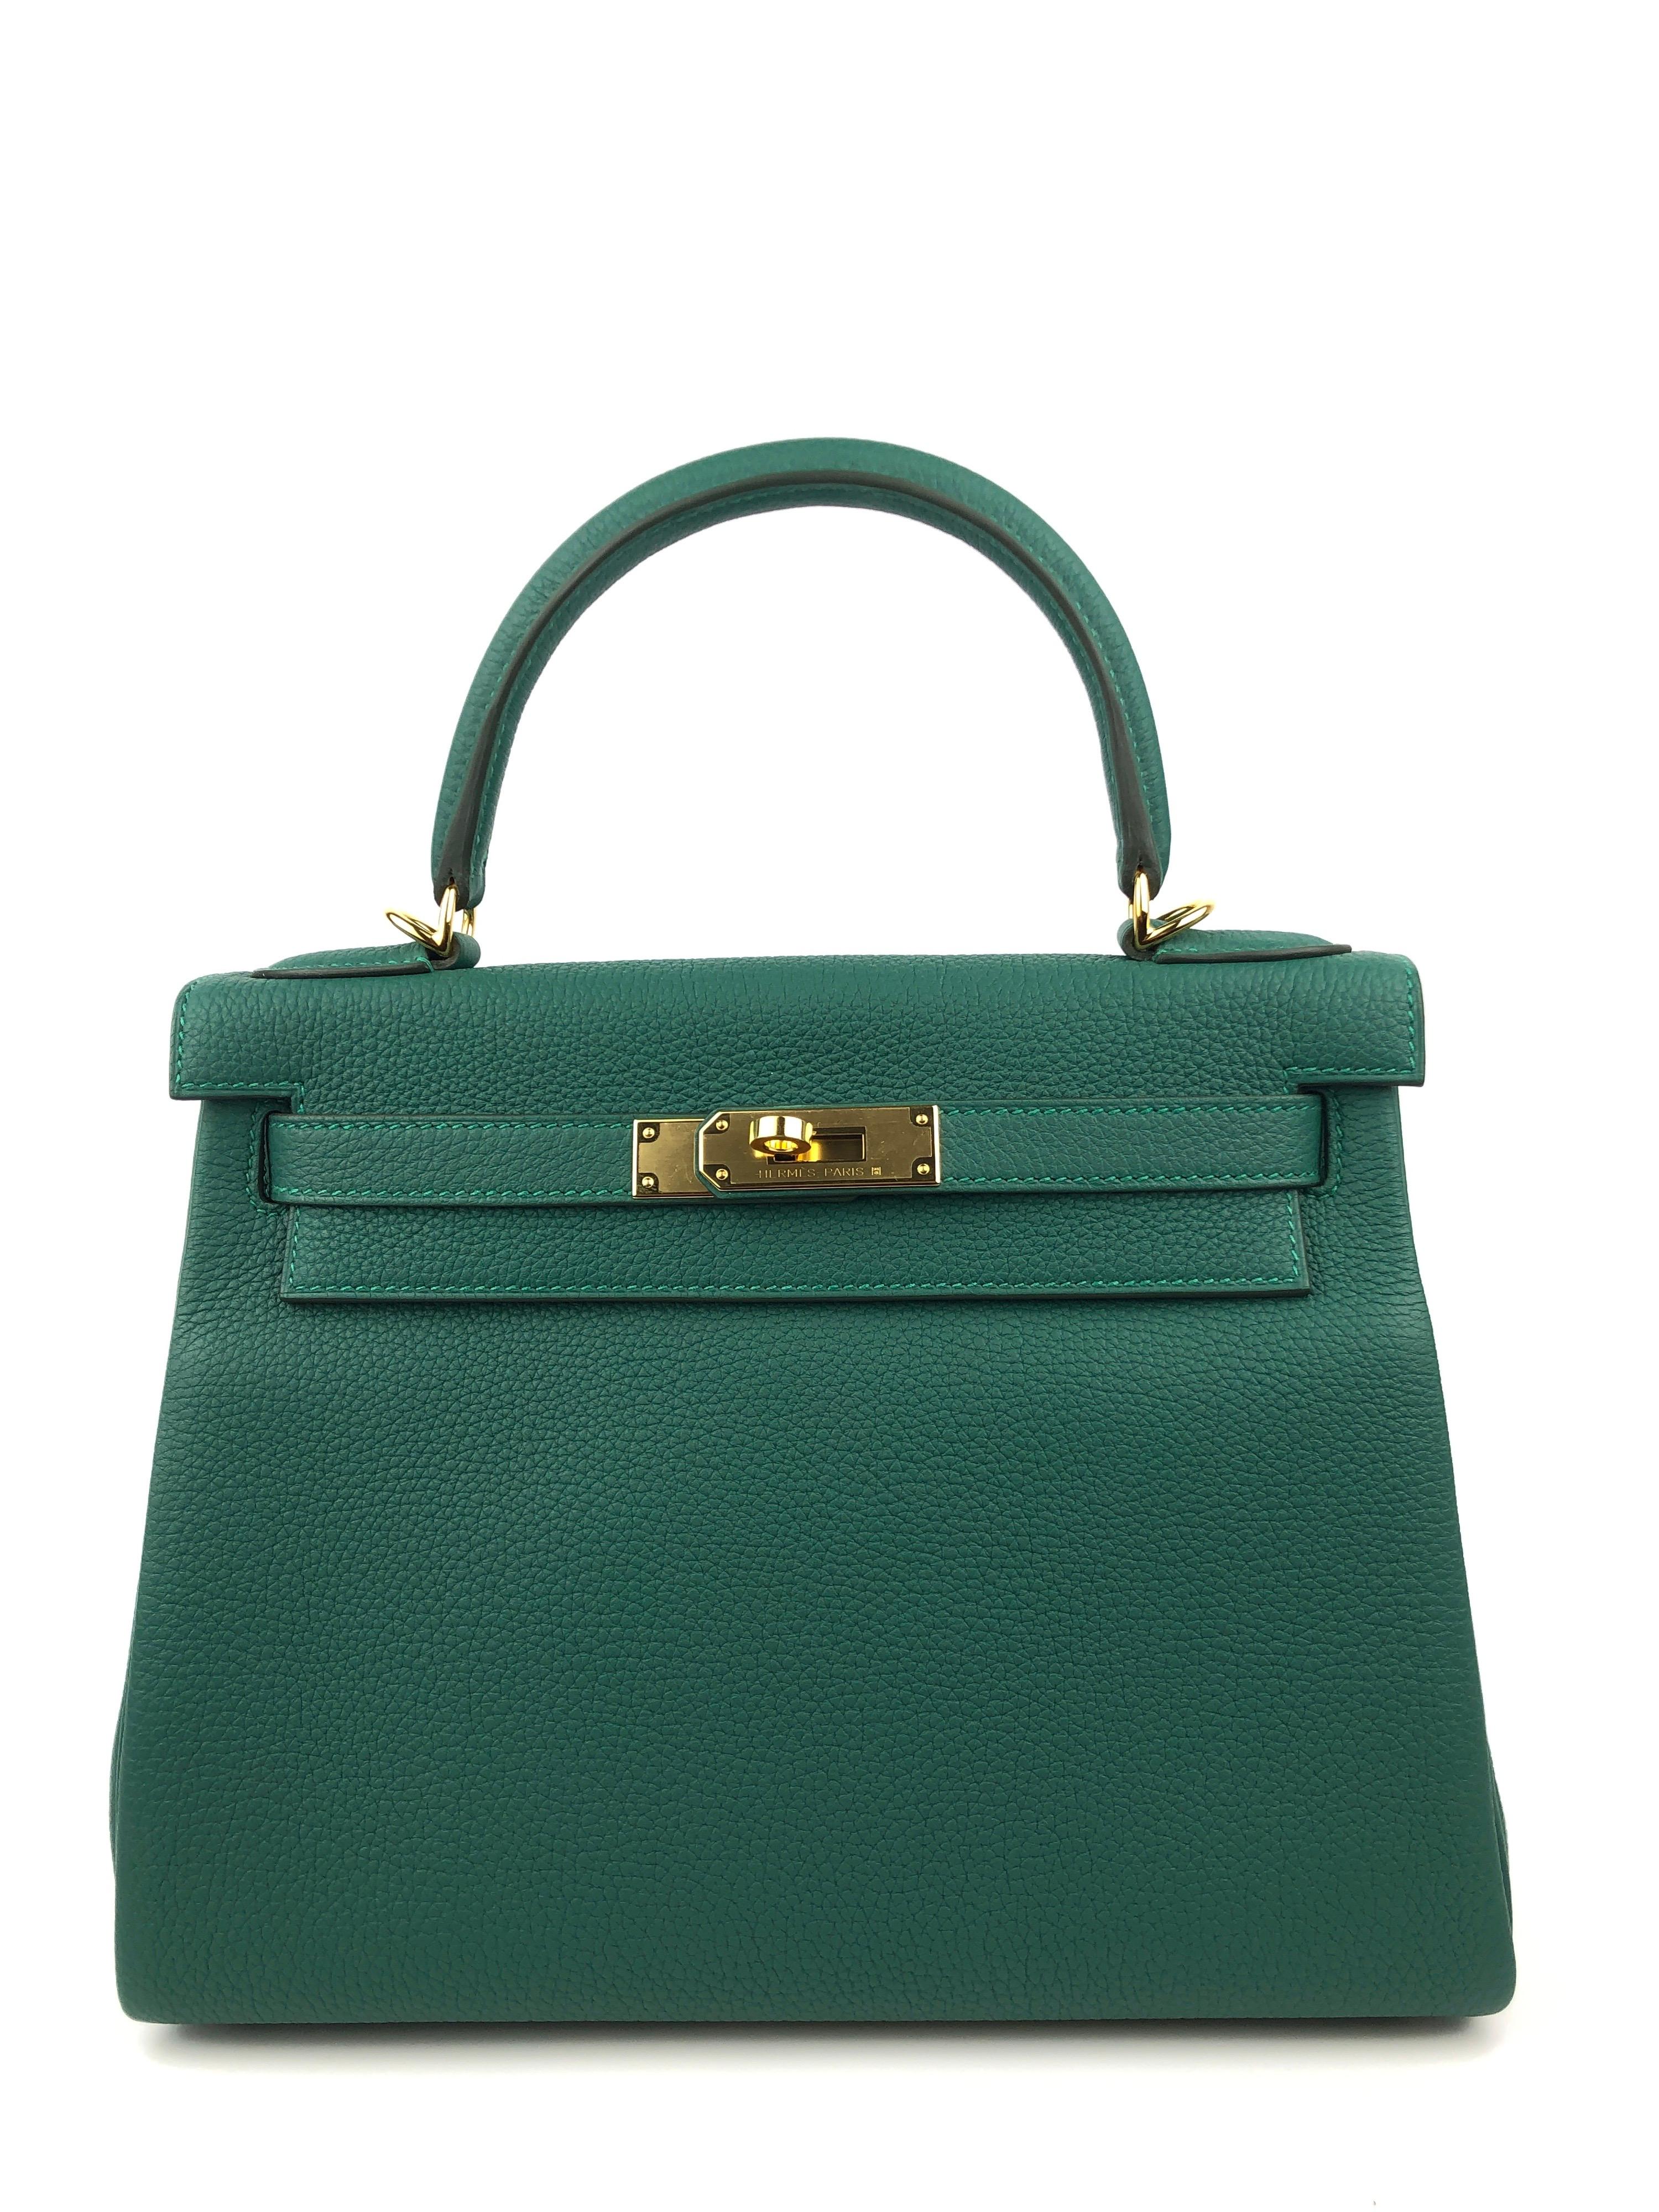 New Hermes Kelly 28 Malachite Gold Hardware. Rare find! 2020 Y Stamp. 

Shop with confidence from Lux Addicts. Authenticity guaranteed! 